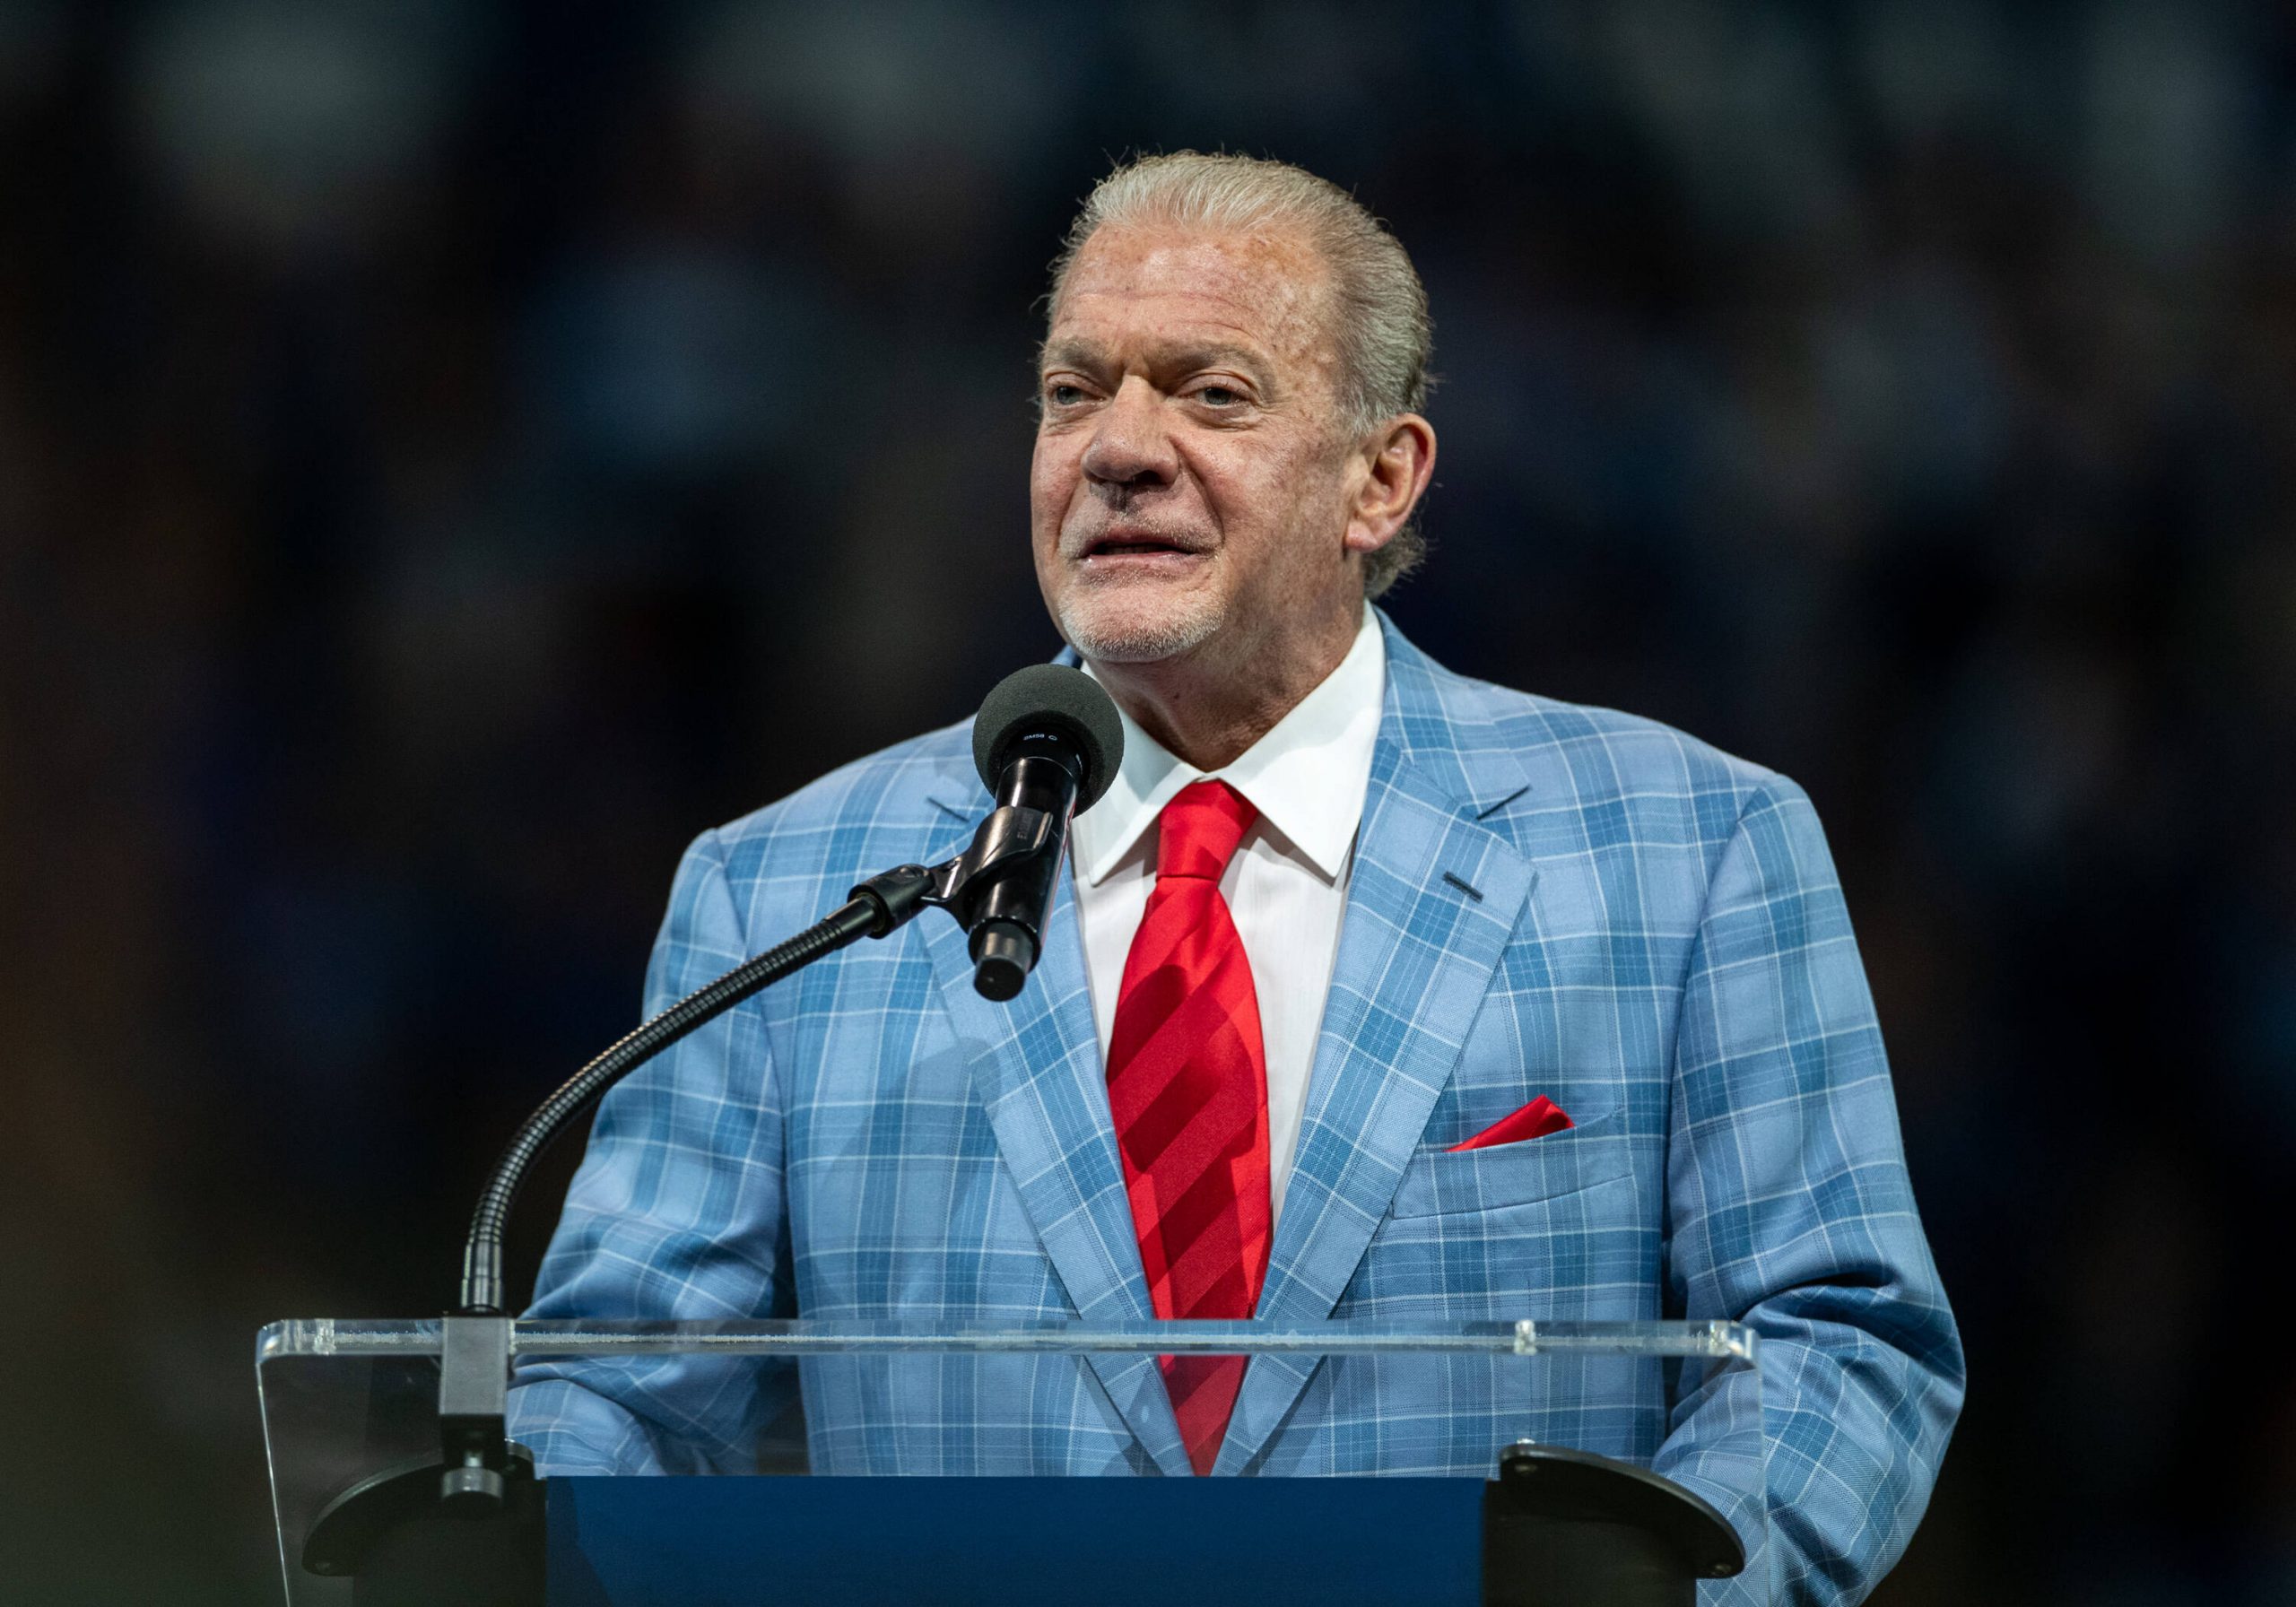 September 19, 2021: Indianapolis Colts owner Jim Irsay speaks during halftime Hall of Fame ring ceremony of NFL, American Football Herren, USA football game action between the Los Angeles Rams and the Indianapolis Colts at Lucas Oil Stadium in Indianapolis, Indiana. Los Angeles defeated Indianapolis 27-24. /CSM. USA - ZUMAc04_ 20210919_zaf_c04_410 Copyright: xJohnxMersitsx